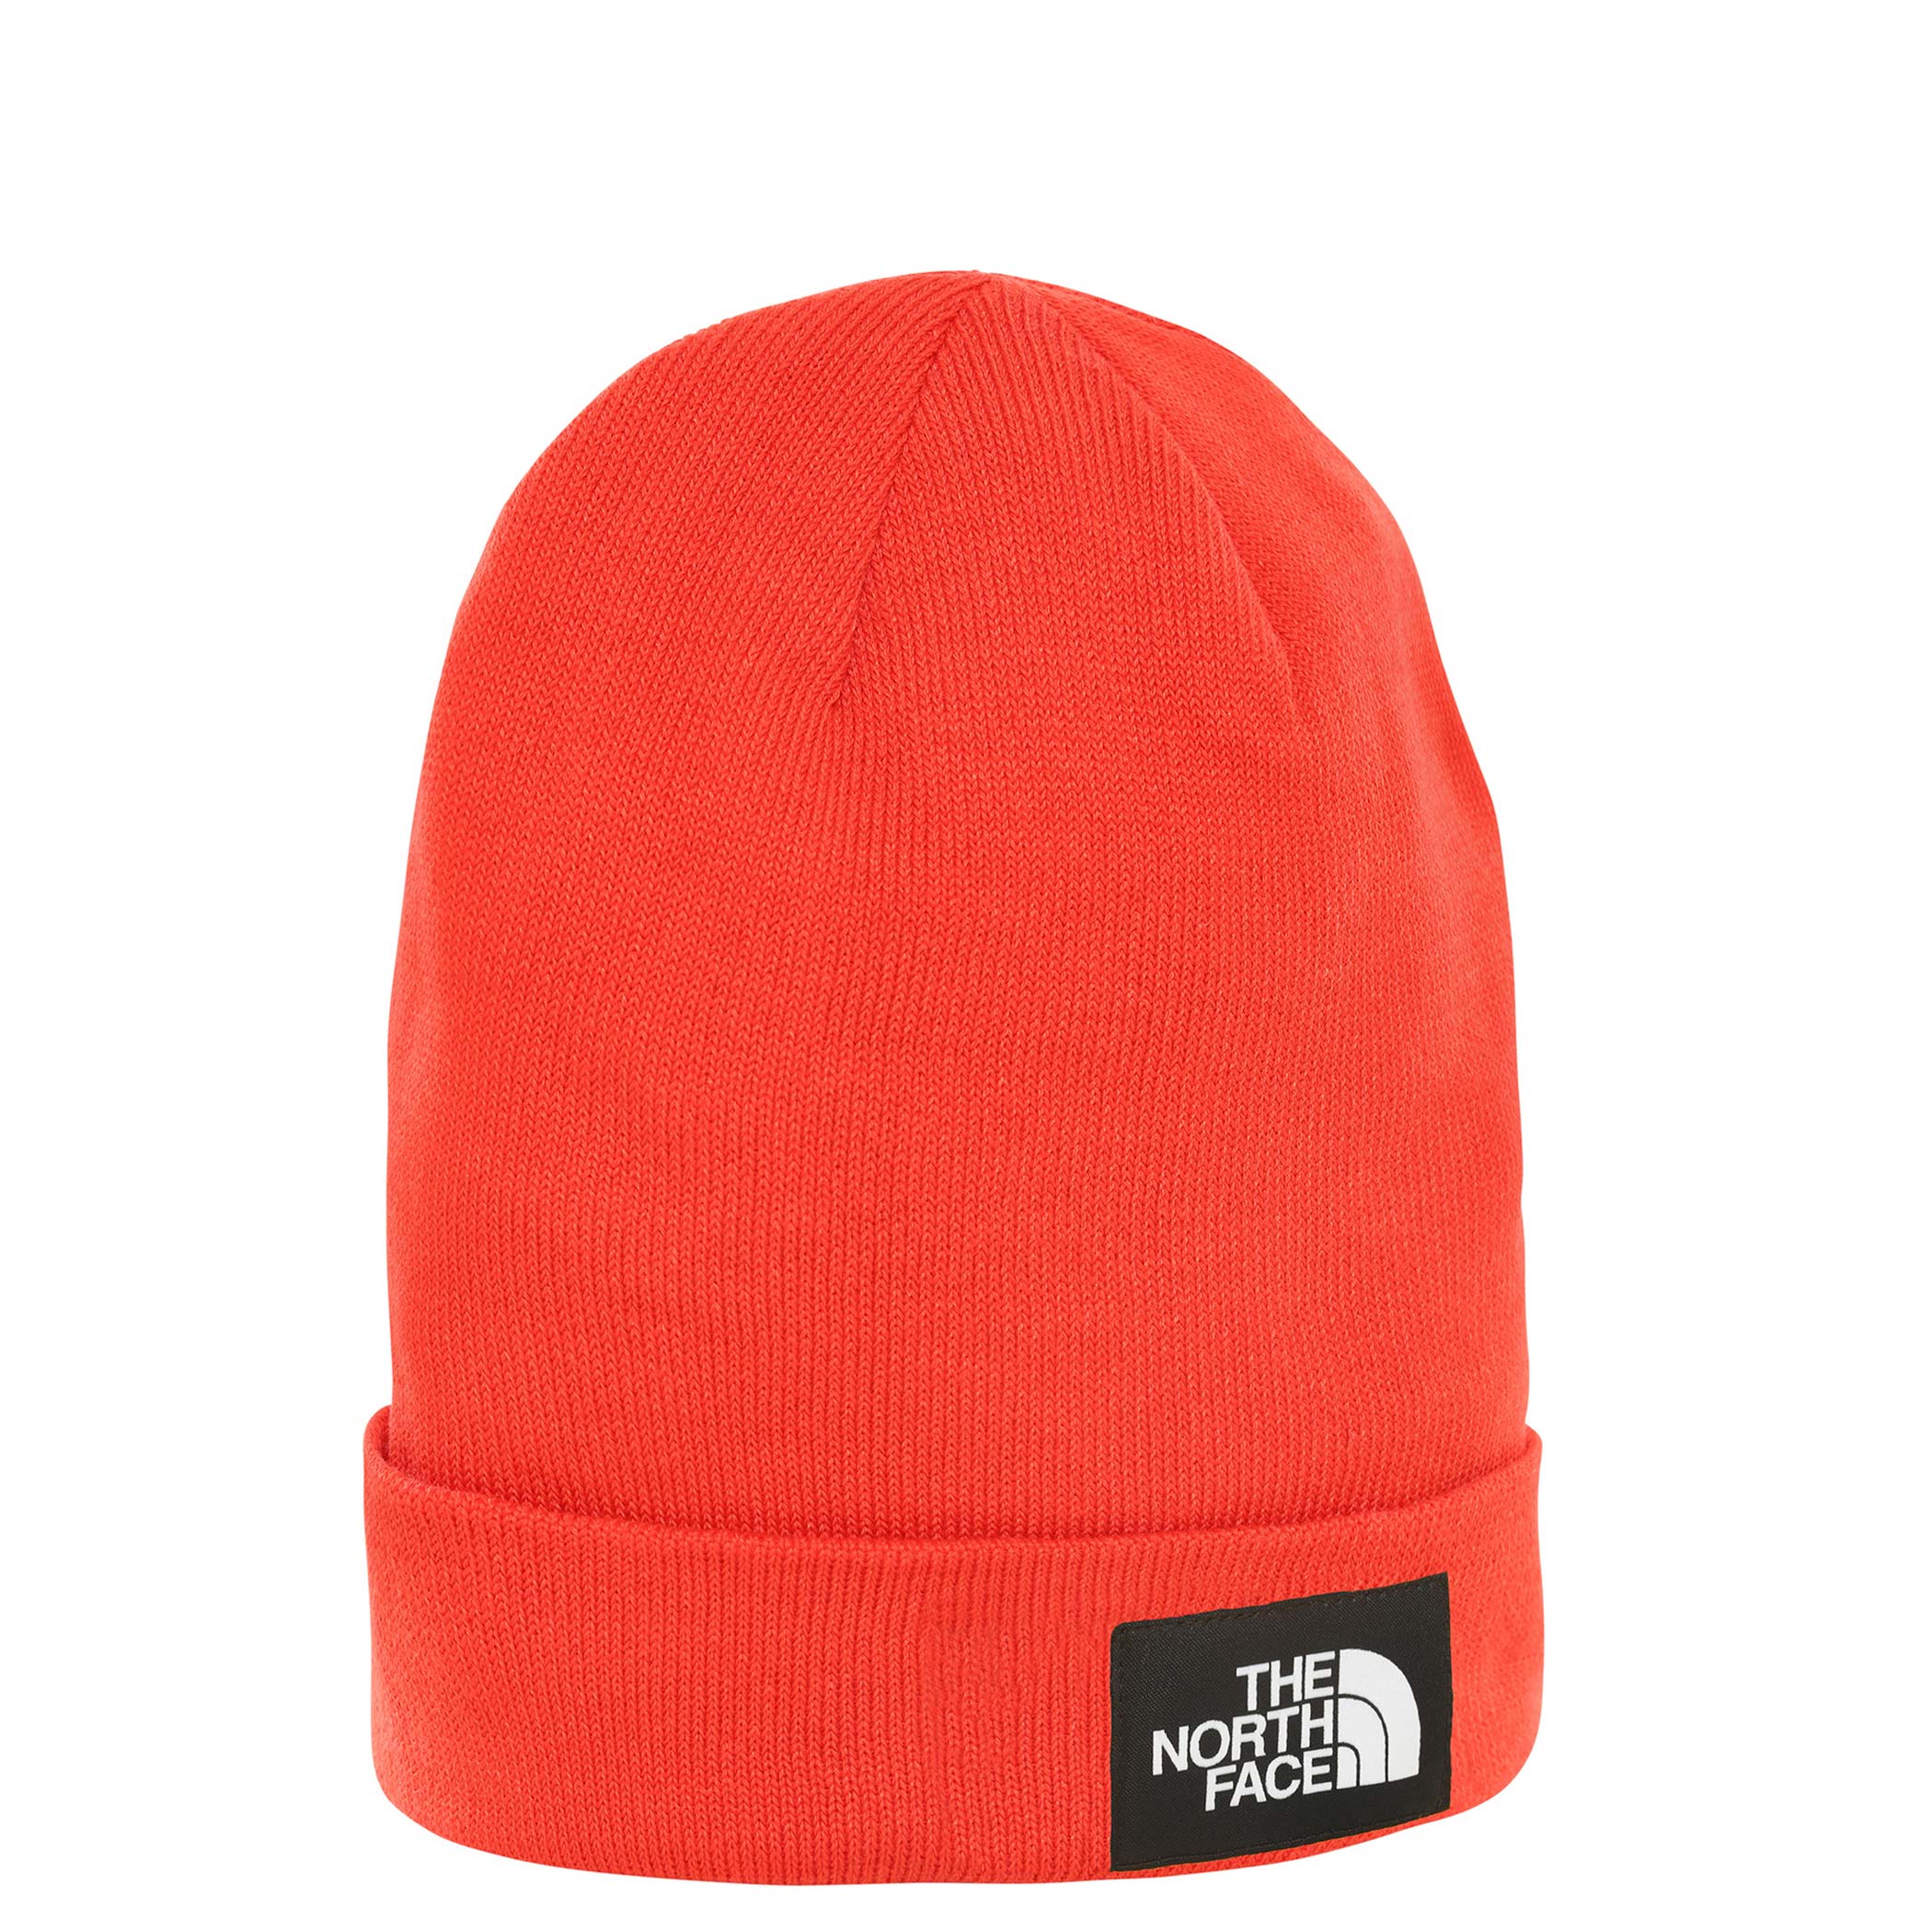 The North Face Dock Worker Beanie 